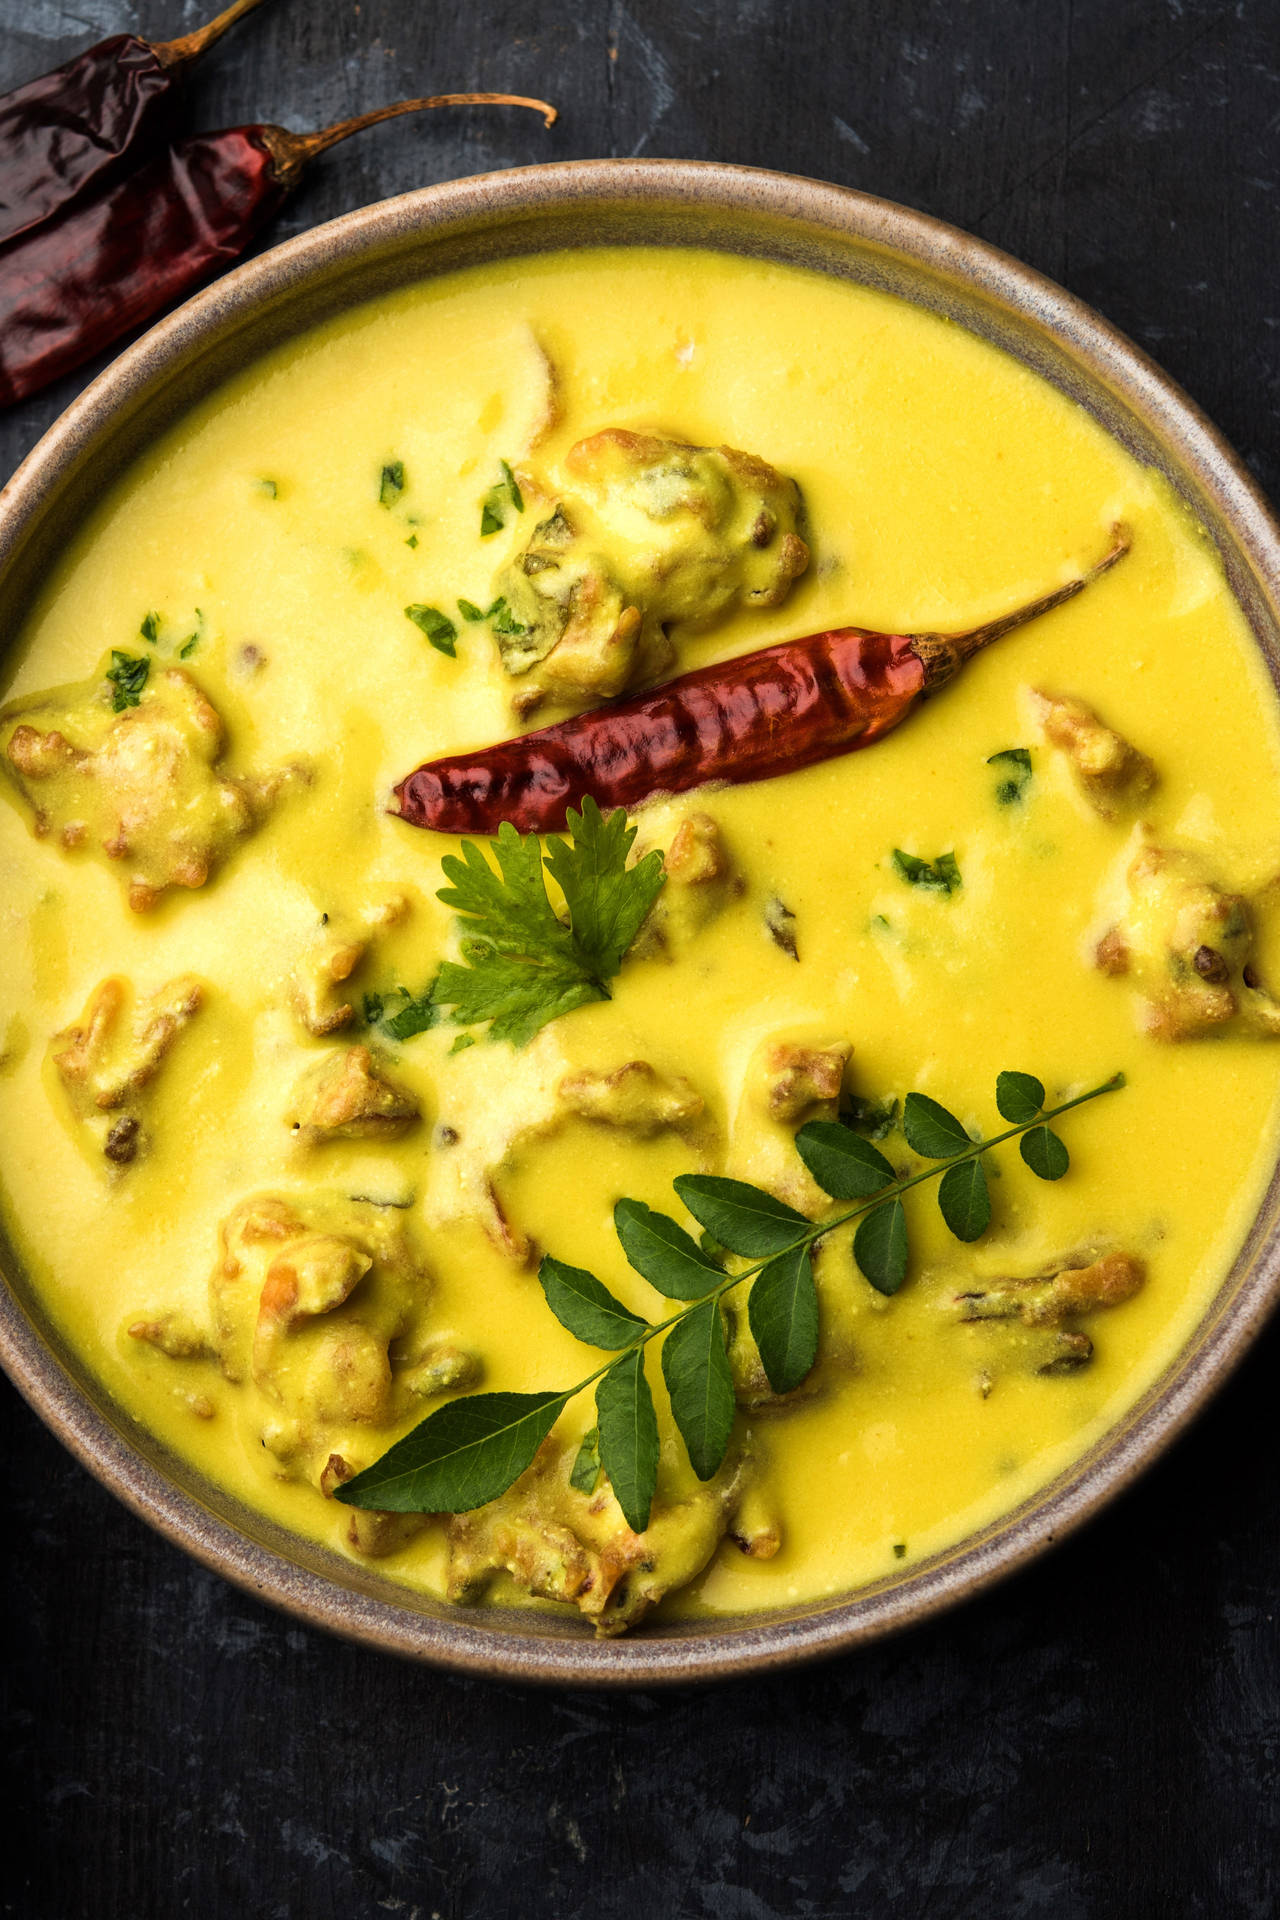 Authentic Yellow Curry with Fenugreek Leaves and Chili Wallpaper